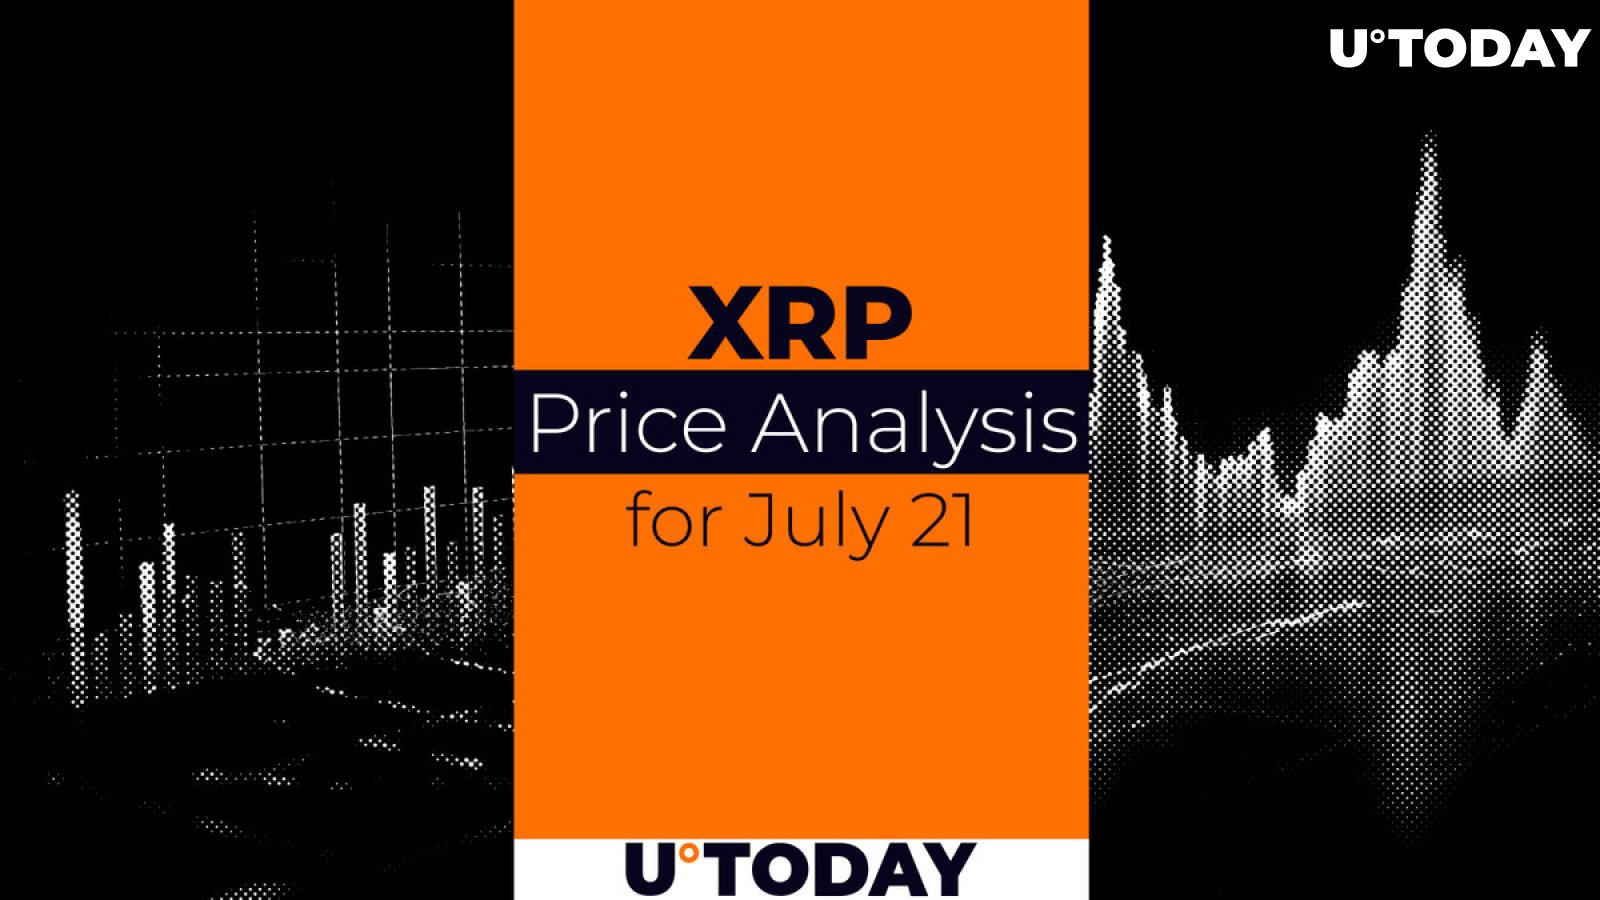 XRP Price Prediction for July 21